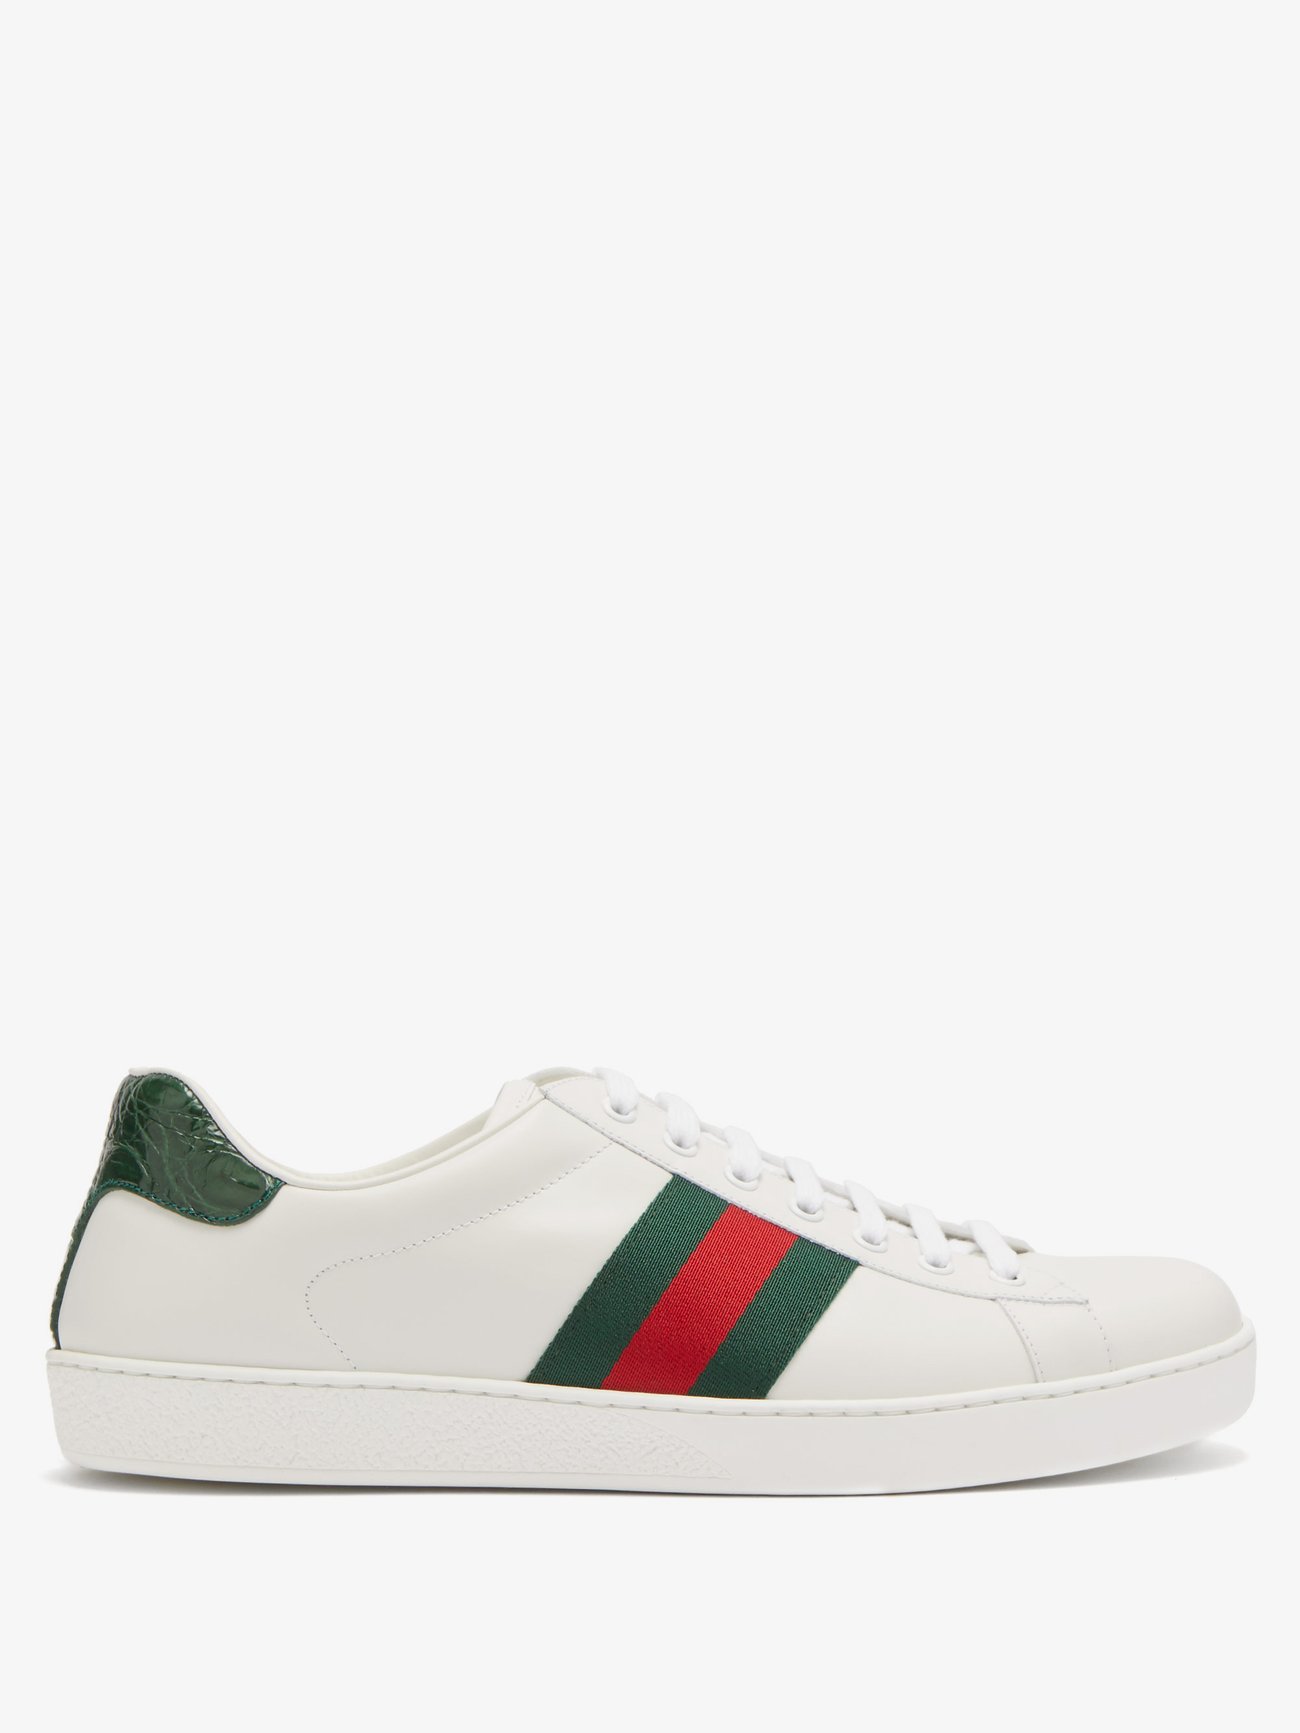 gucci ace style